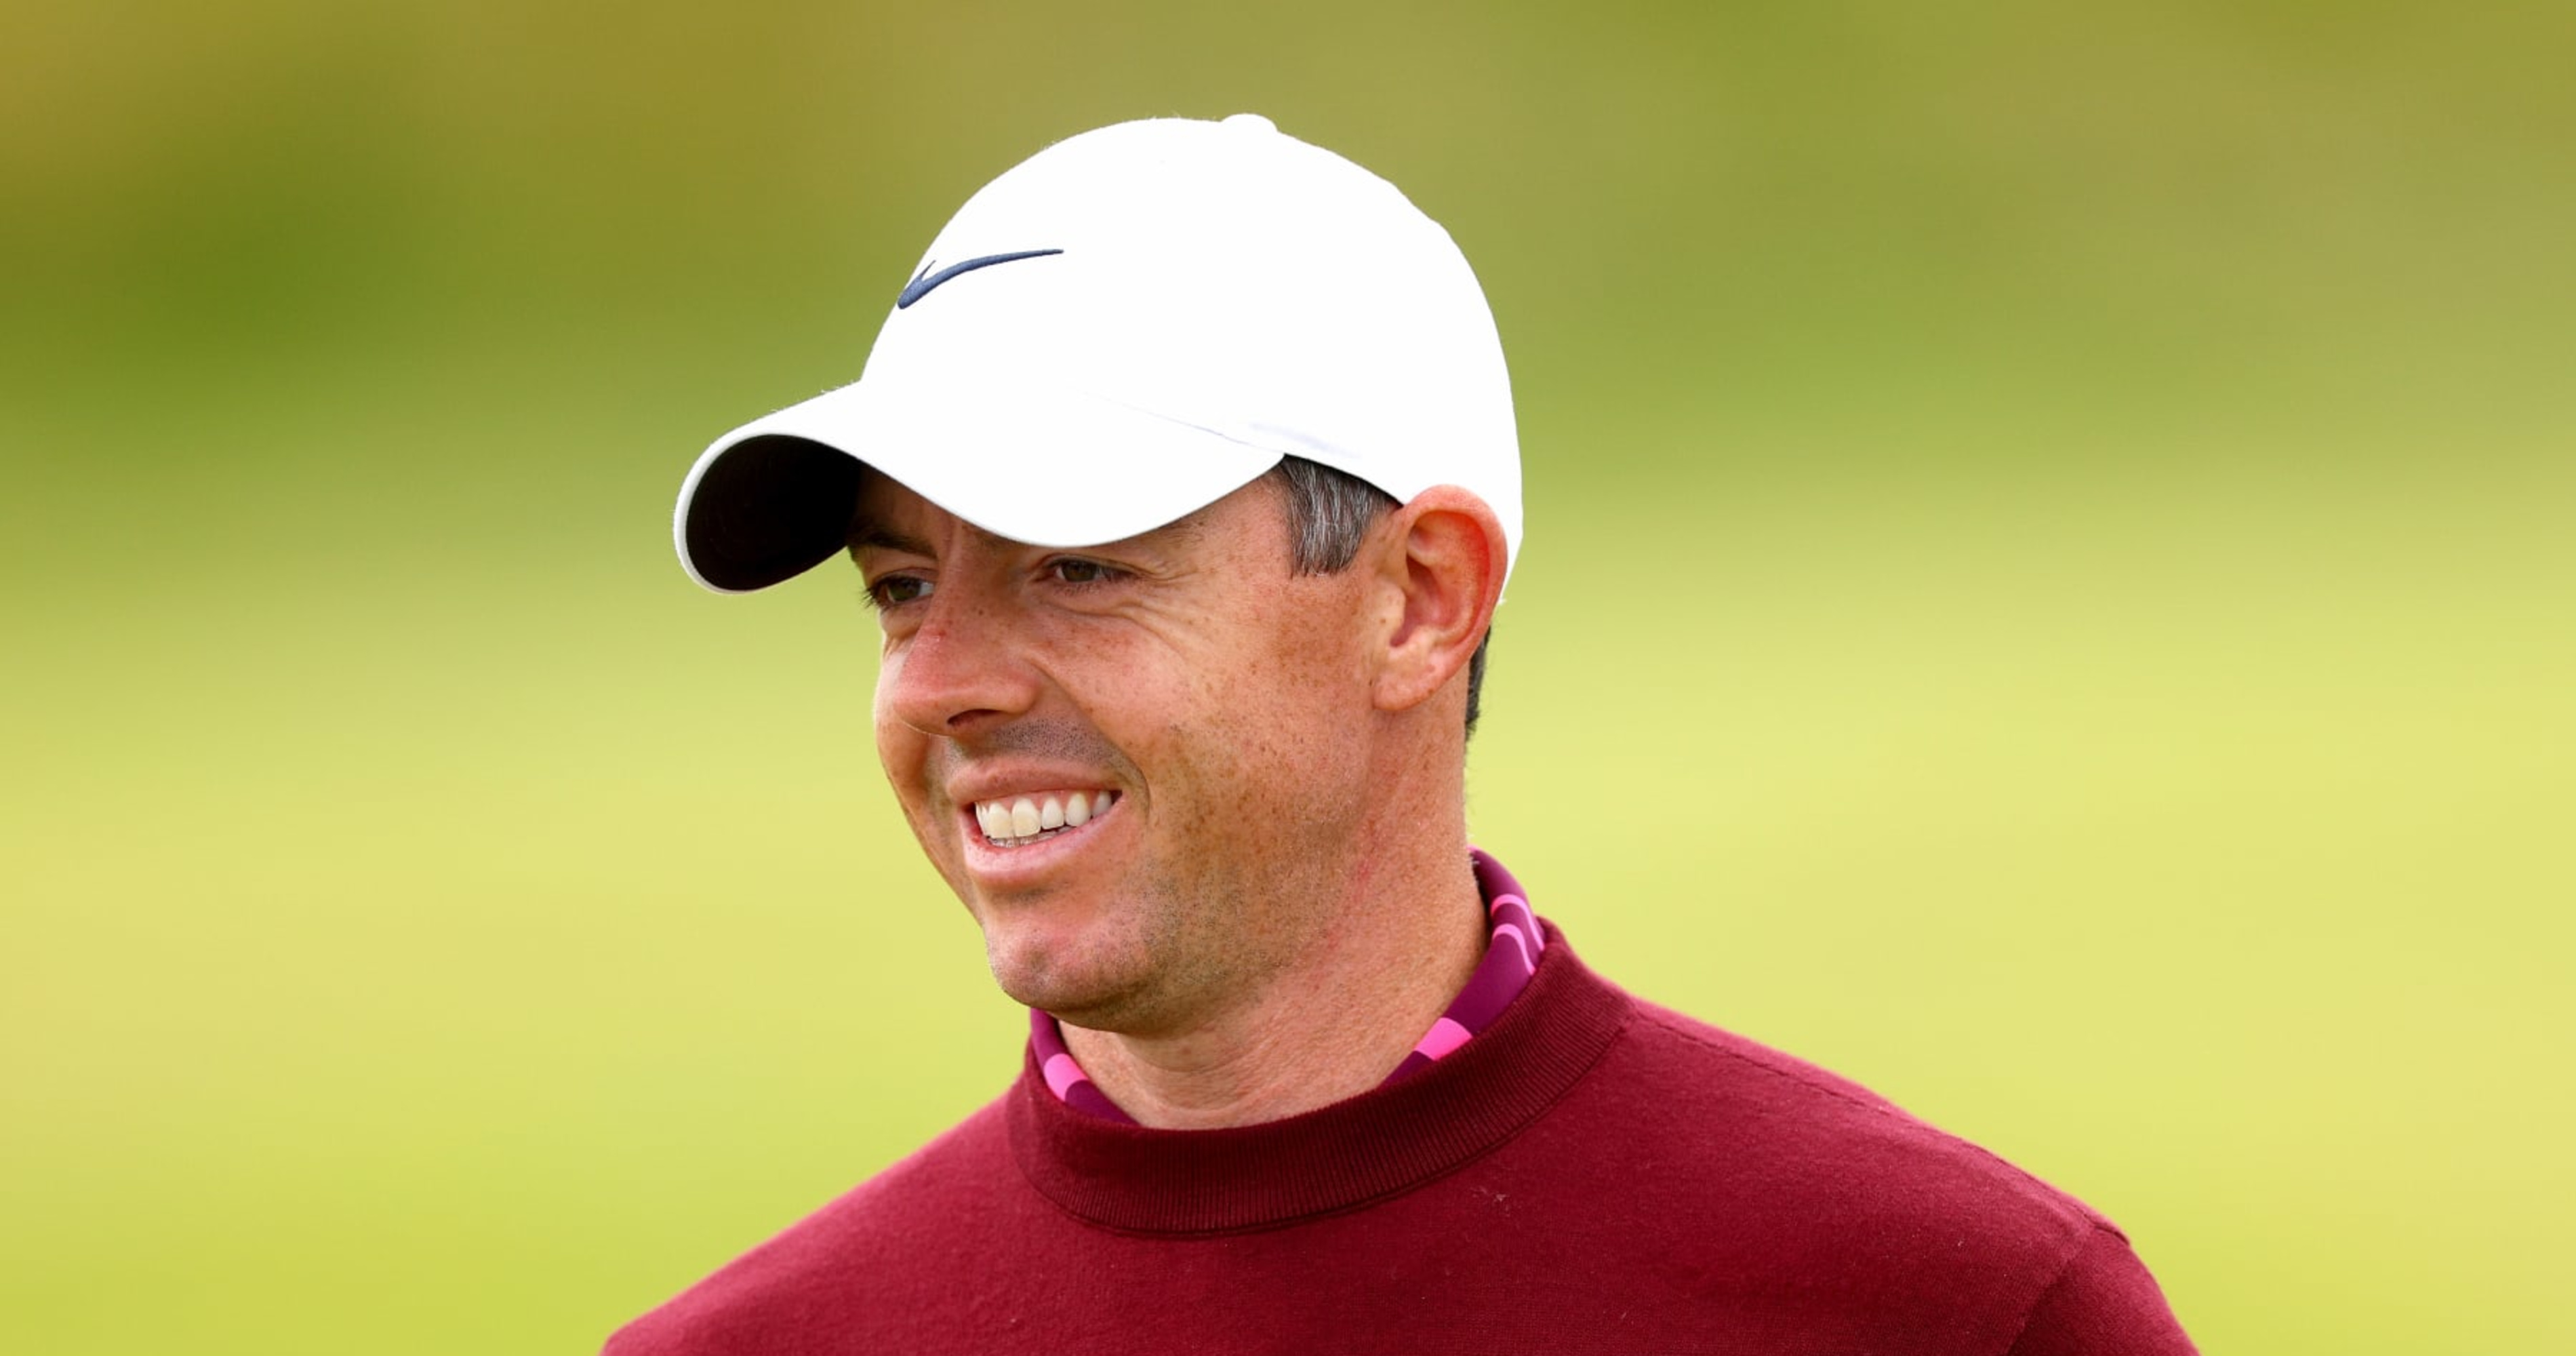 British Open 2023 Tee Times, Pairings Revealed for McIlroy, Mickelson